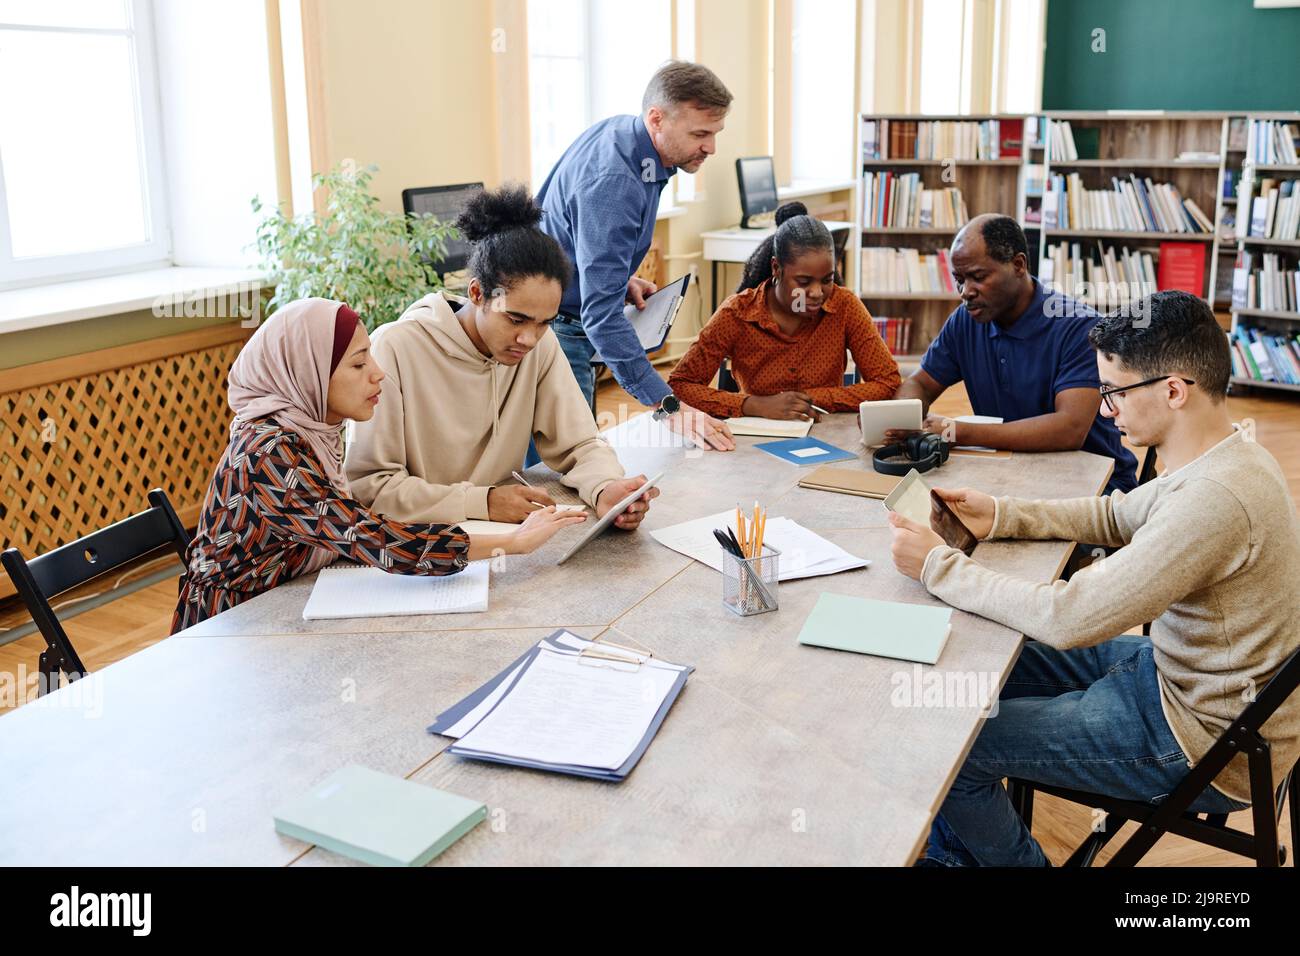 Mature Caucasian English language teacher helping immigrant students with doing task during lesson in library Stock Photo